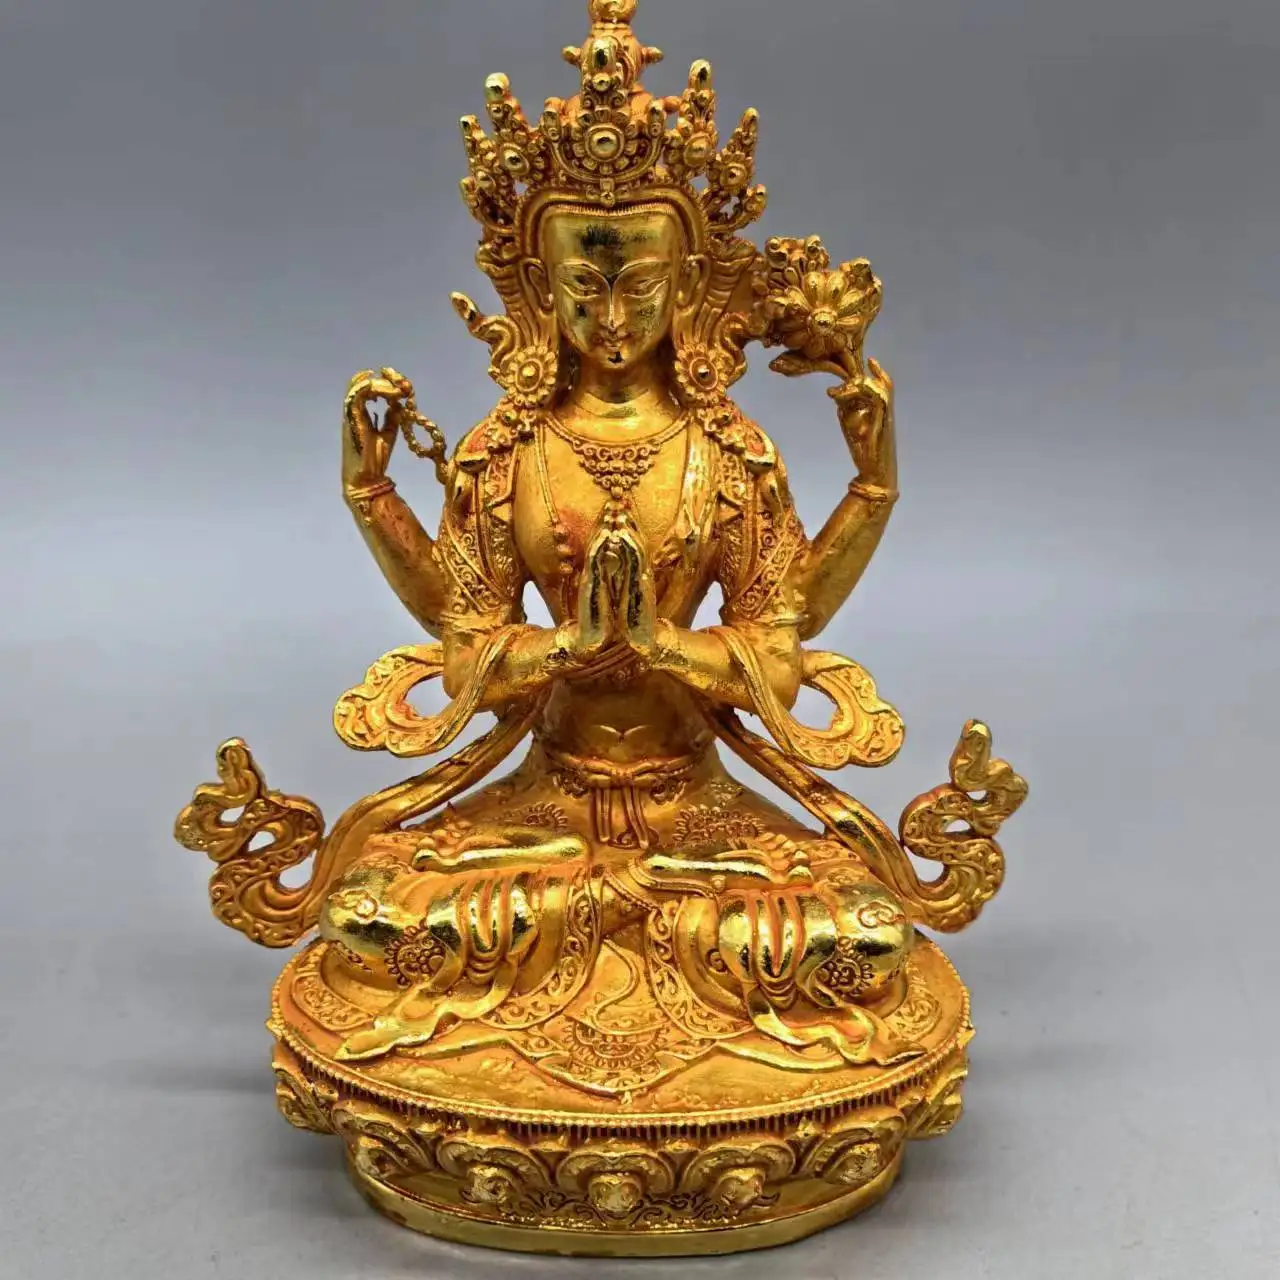 

Home Handicrafts Gold-plated Buddha Statues Finely Crafted With Exquisite Patterns